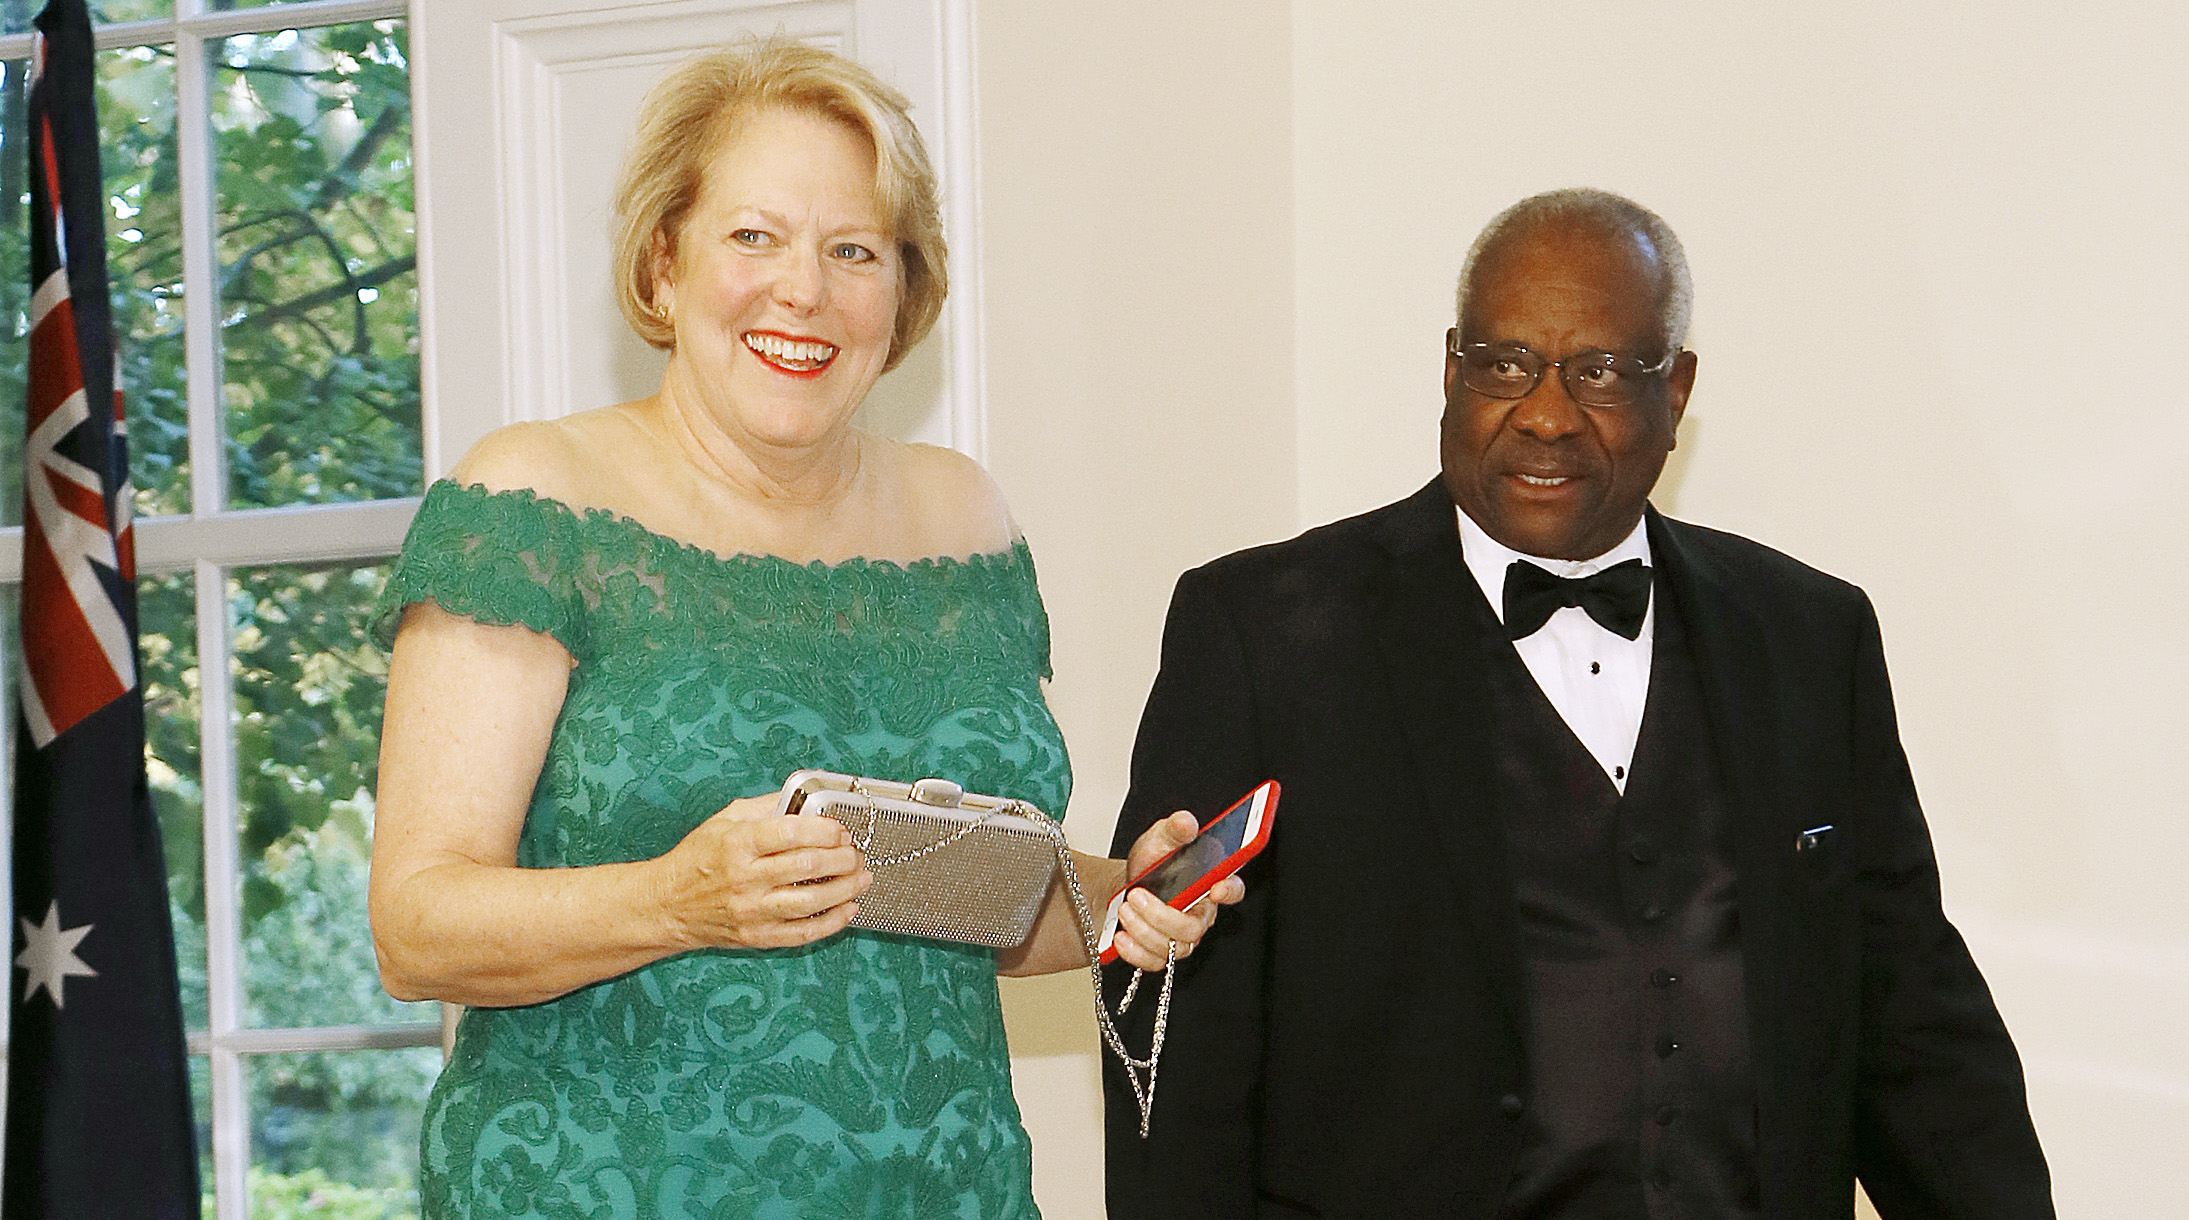 WASHINGTON, DC - SEPTEMBER 20: Supreme Court Justice Clarence Thomas (R) and Virginia Thomas arrive for the State Dinner at The White House honoring Australian PM Morrison on September 20, 2019 in Washington, DC. Prime Minister Morrison is on a state visit in Washington hosted by President Trump. (Photo by Paul Morigi/Getty Images)